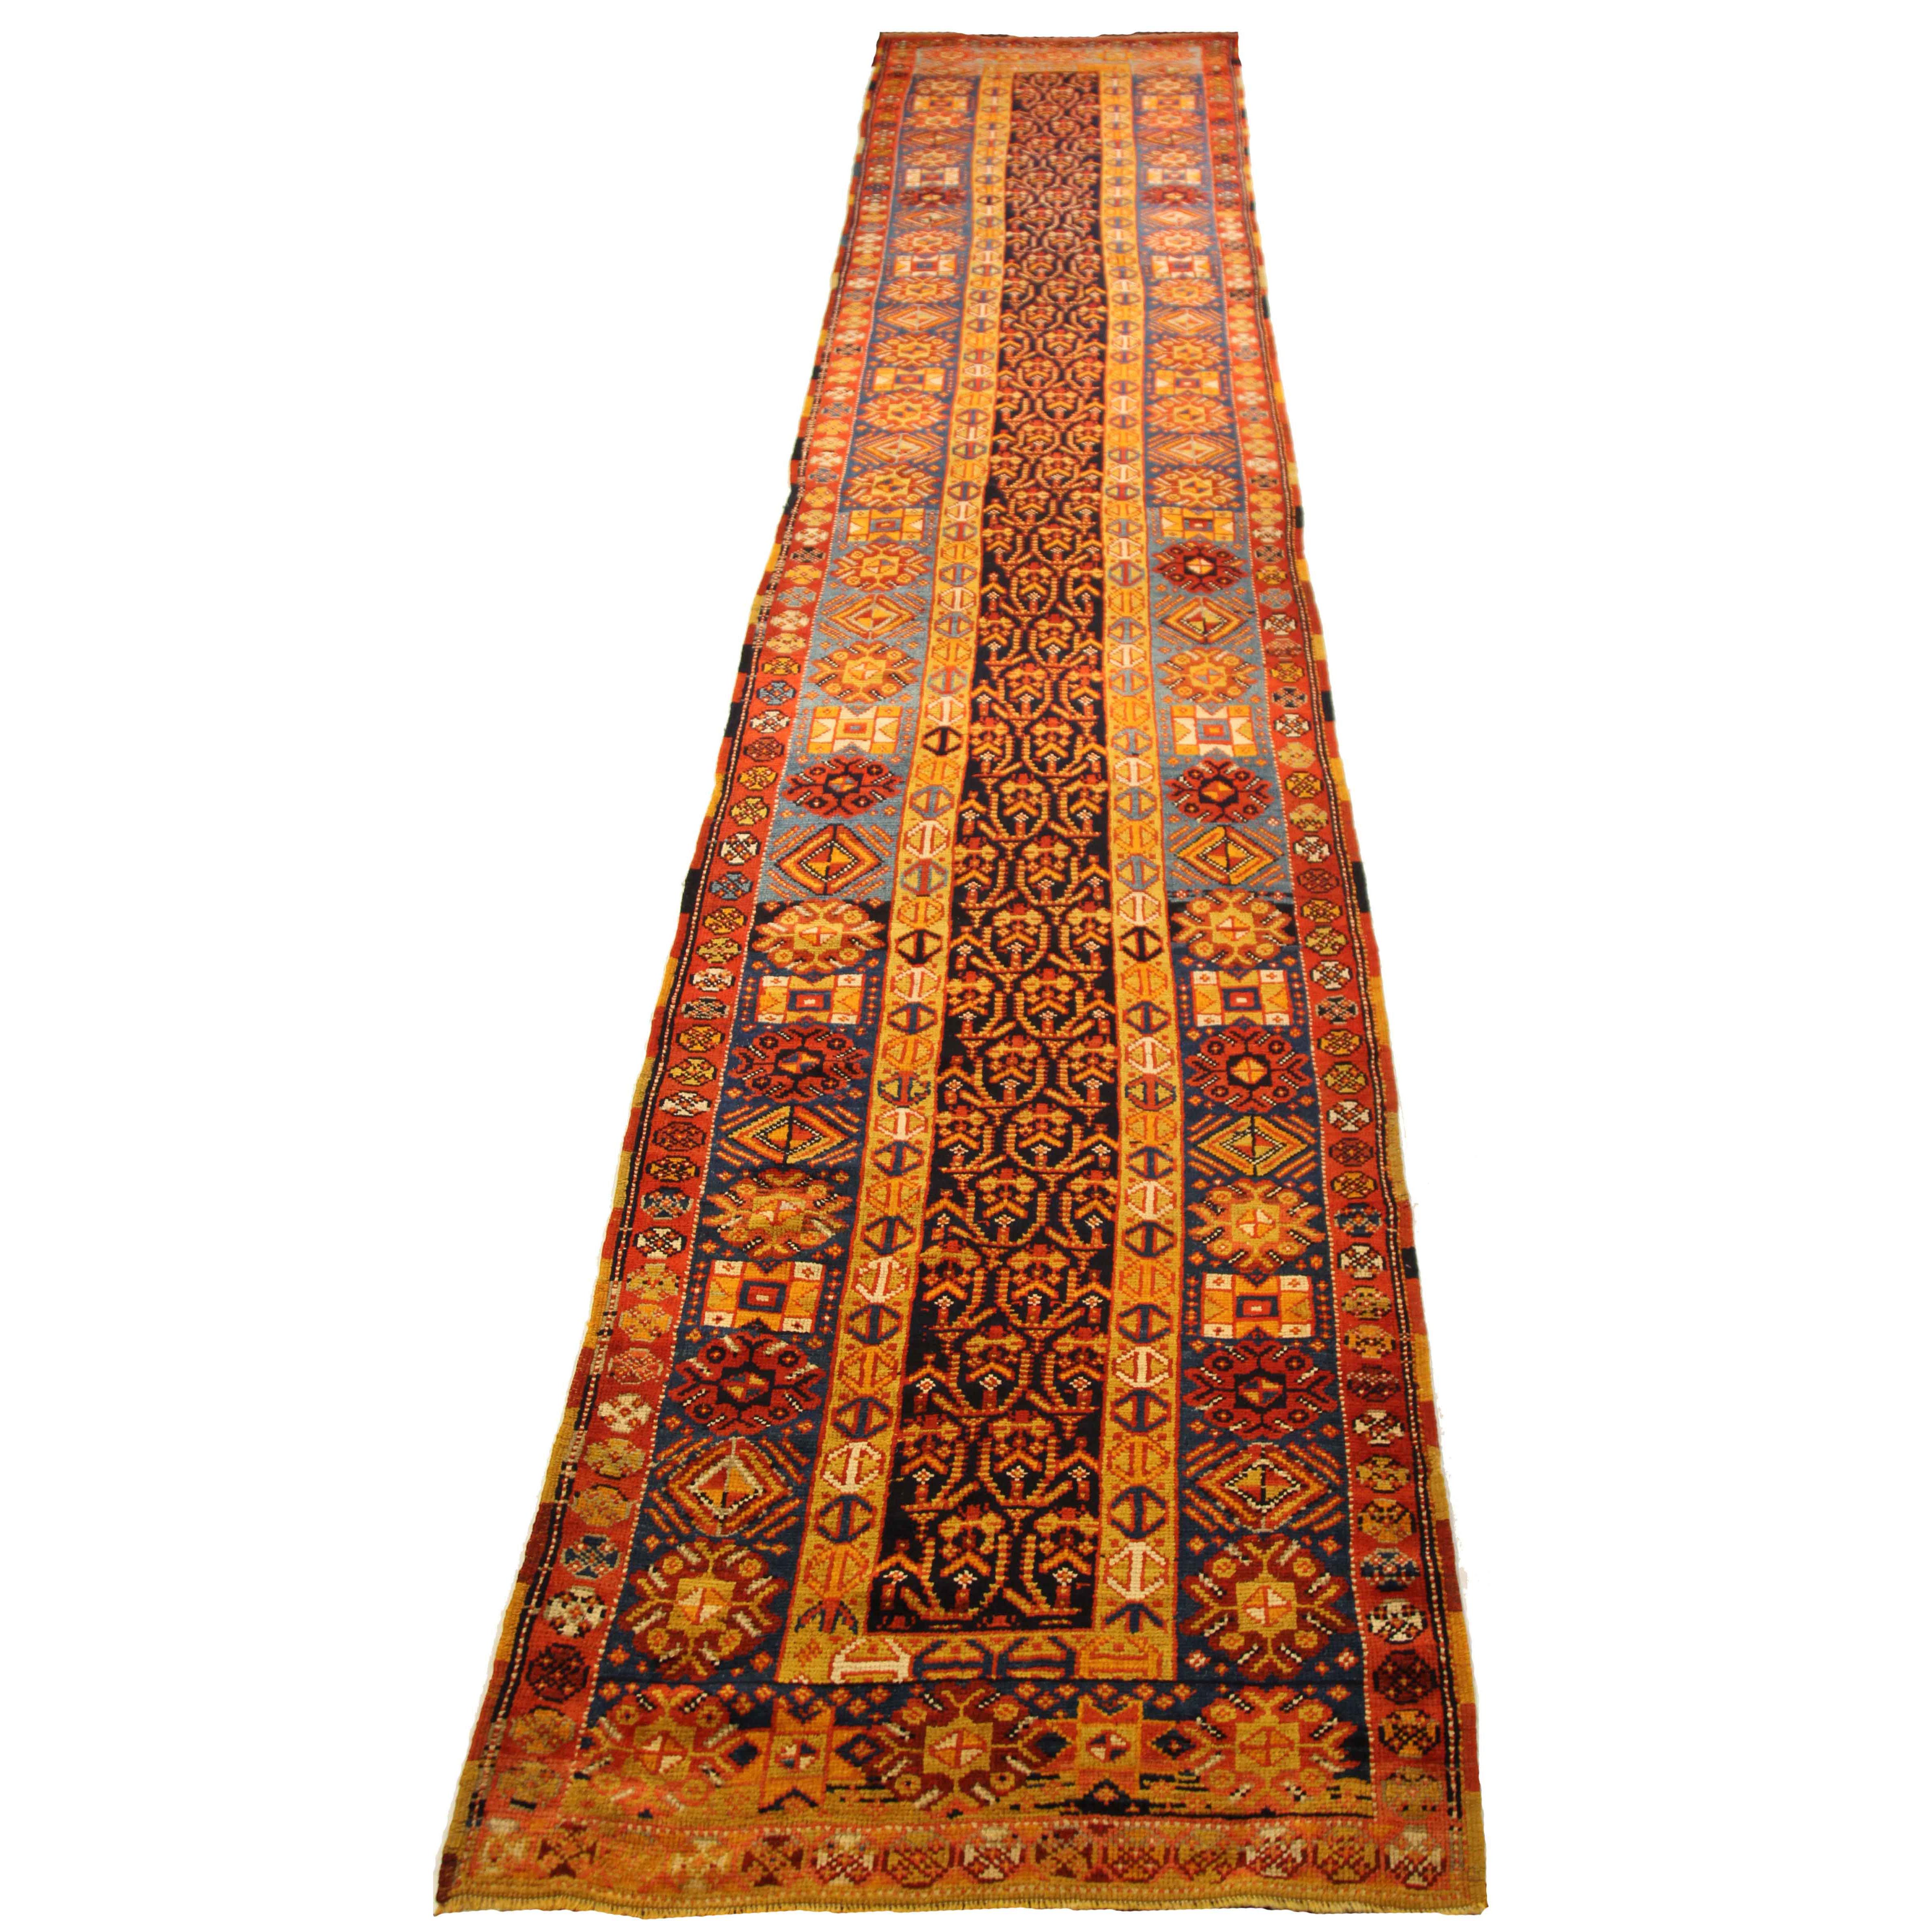 Handwoven in the early 19th century using the finest wool, this antique Turkish rug features stunning geometric patterns that made Oushak carpets one of the most popular styles in the rug world. For color, it perfectly captures ancient luxury with a